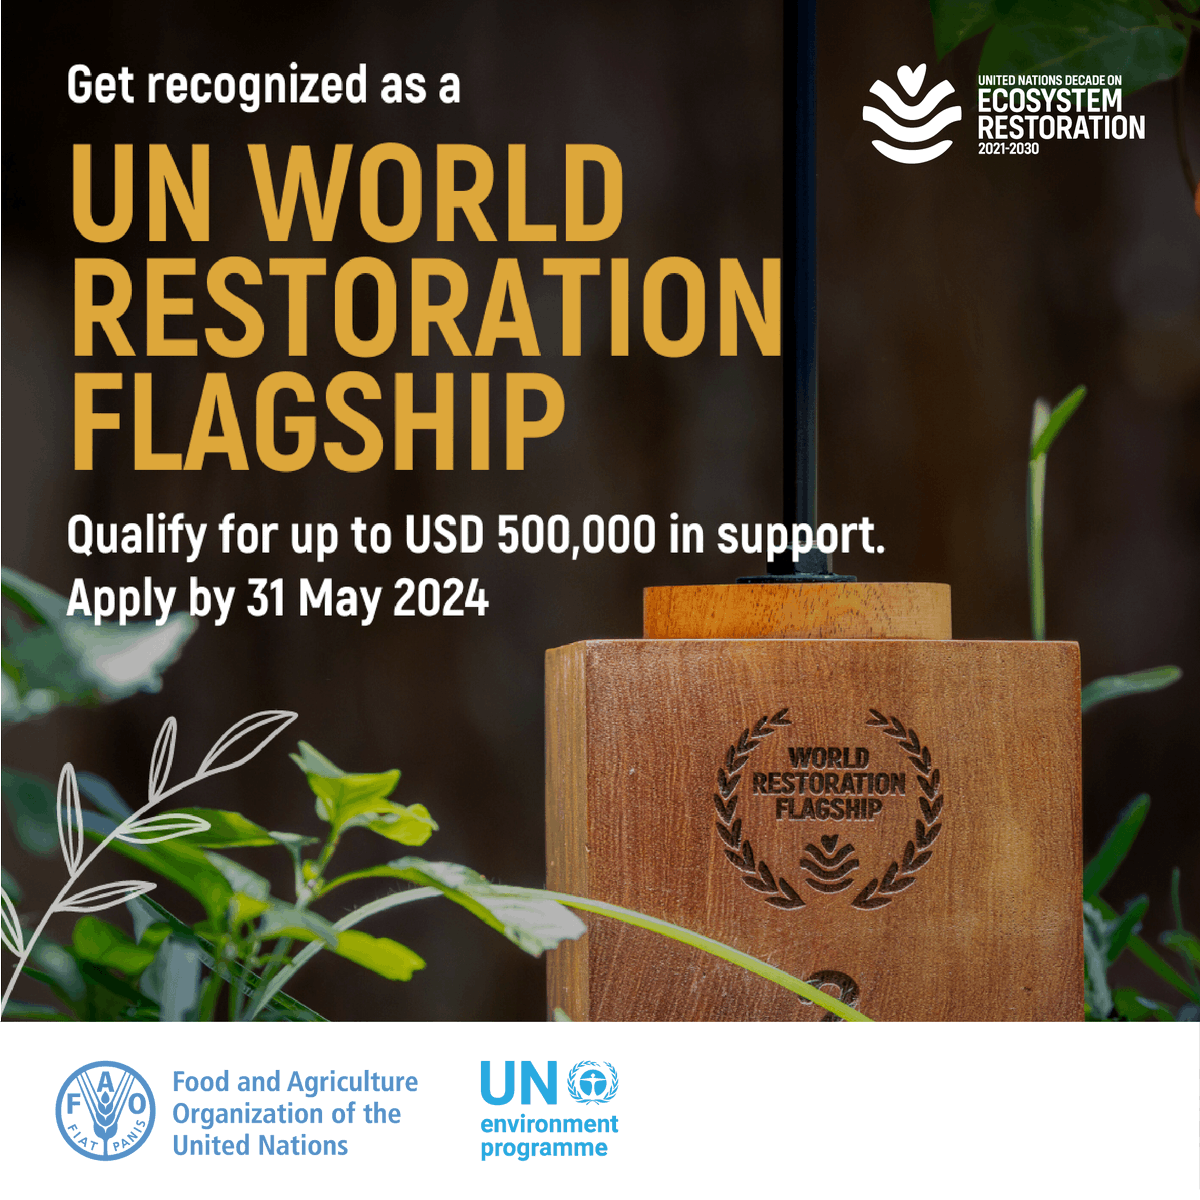 Are you from a country or region whose efforts in restoring an ecosystem could inspire others around the world? Get recognized as a World Restoration Flagship under the UN Decade on Ecosystem Restoration! Apply by 31 May 👉bit.ly/442x3ZL #GenerationRestoration @UNEP